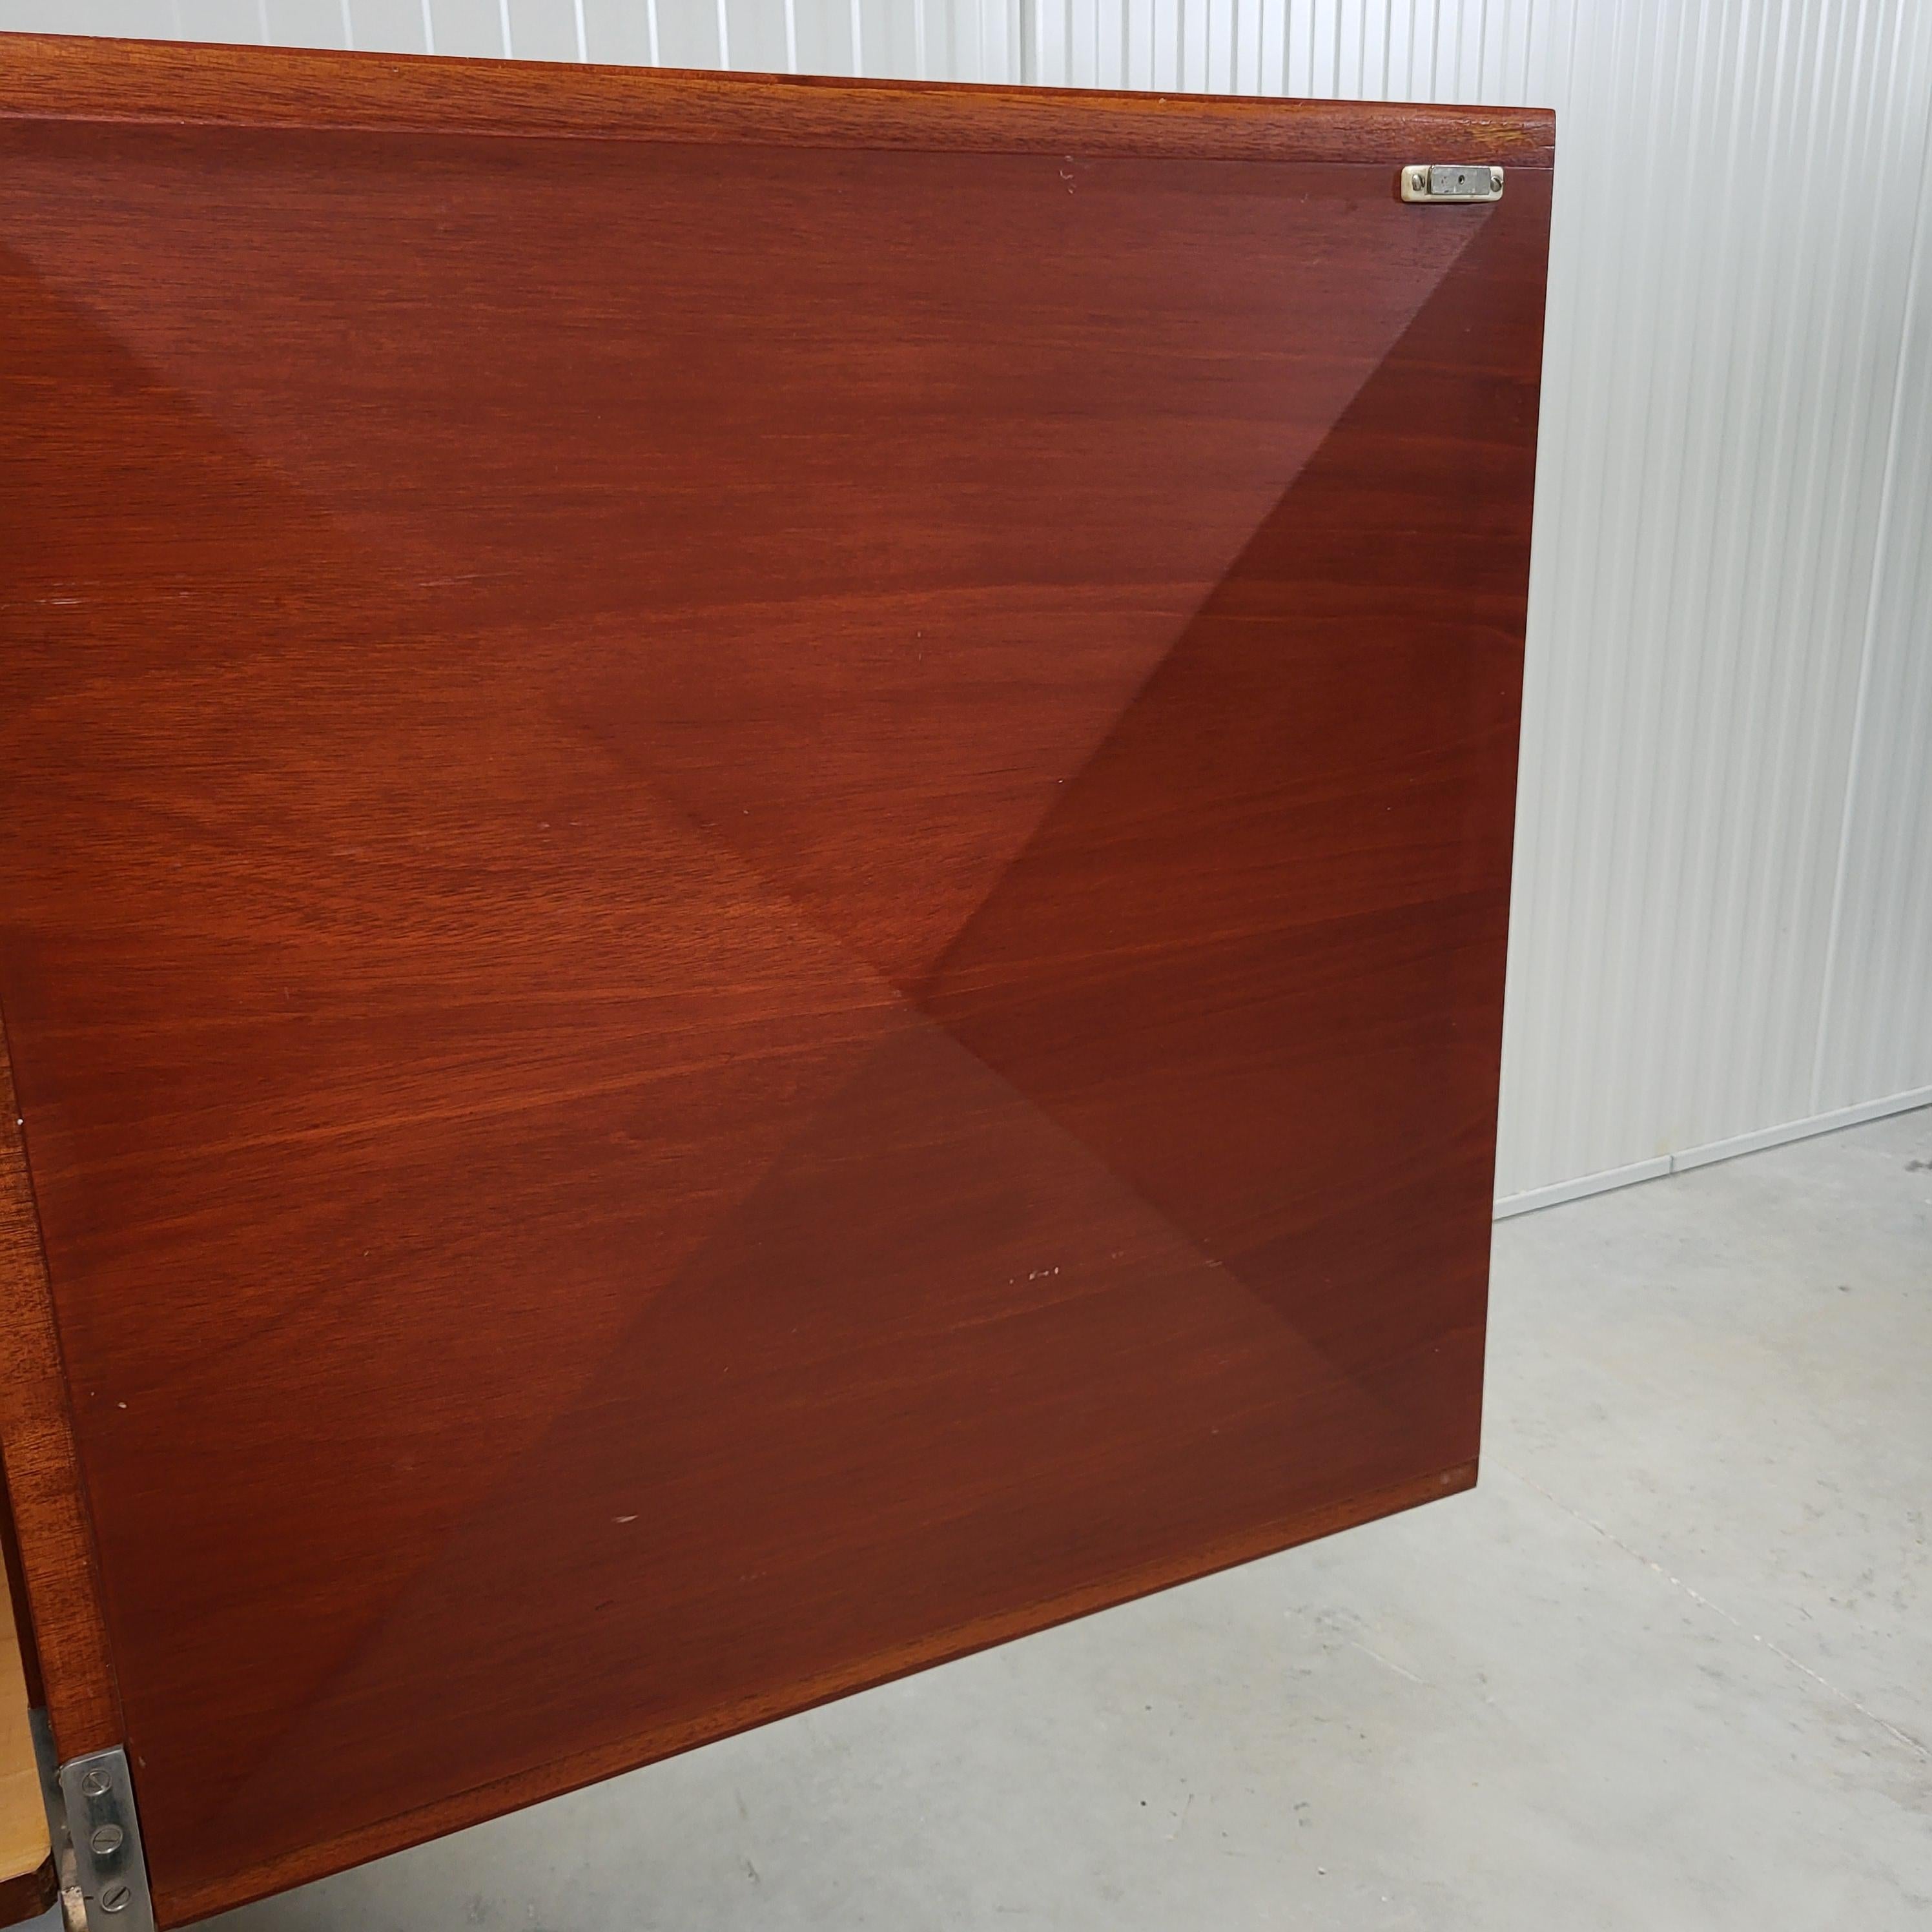 A. Philippon & J. Lecoq Pointe de Diamant Sideboard Credenza by Behr 1962 For Sale 3